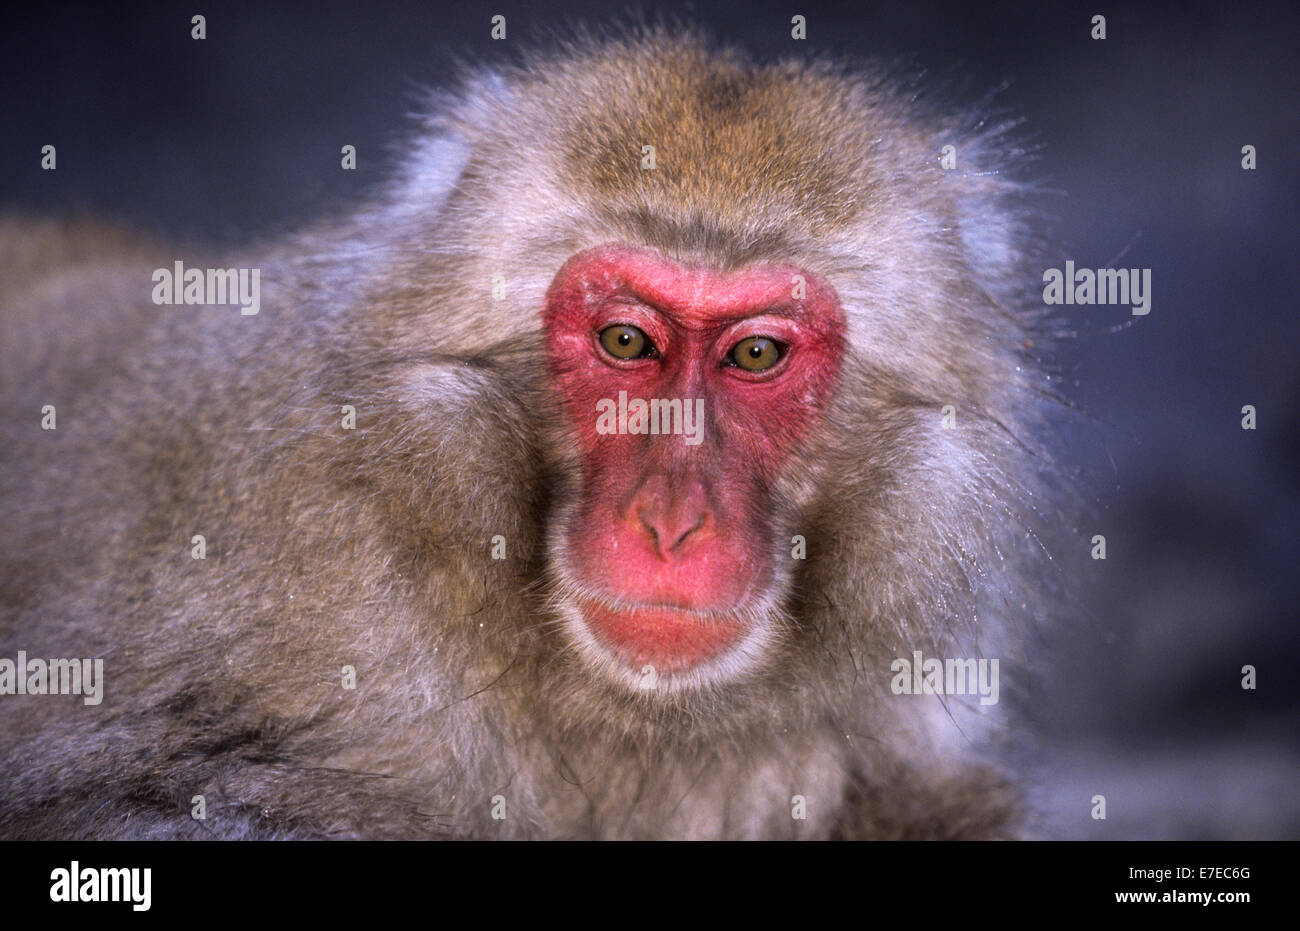 LARGE JAPANESE MACAQUE (Macaca fuscata)  AT HOT SPRING POOL  A PORTRAIT Stock Photo